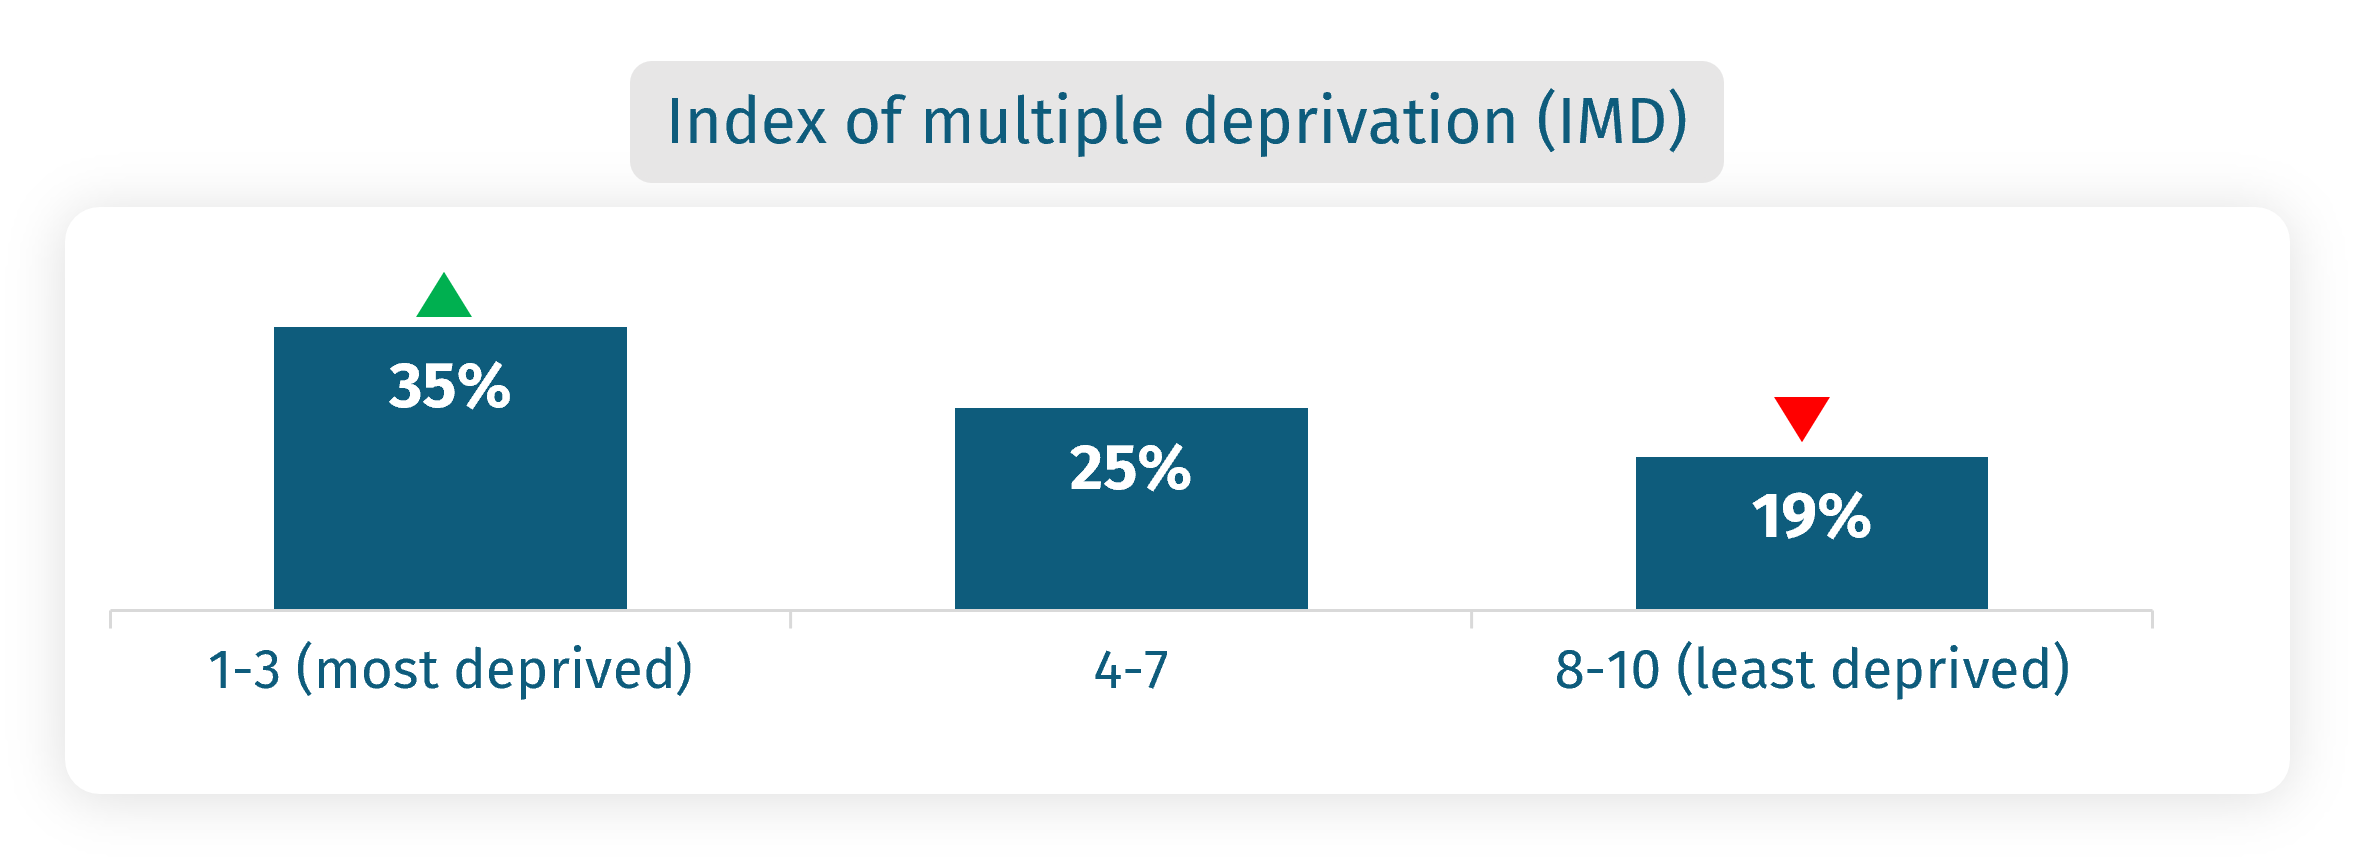 The chart shows the differences in concern over food affordability by the Index of Multiple Deprivation (IMD). 35% of those in the most deprived deciles are worried, compared to 19% in the least deprived.